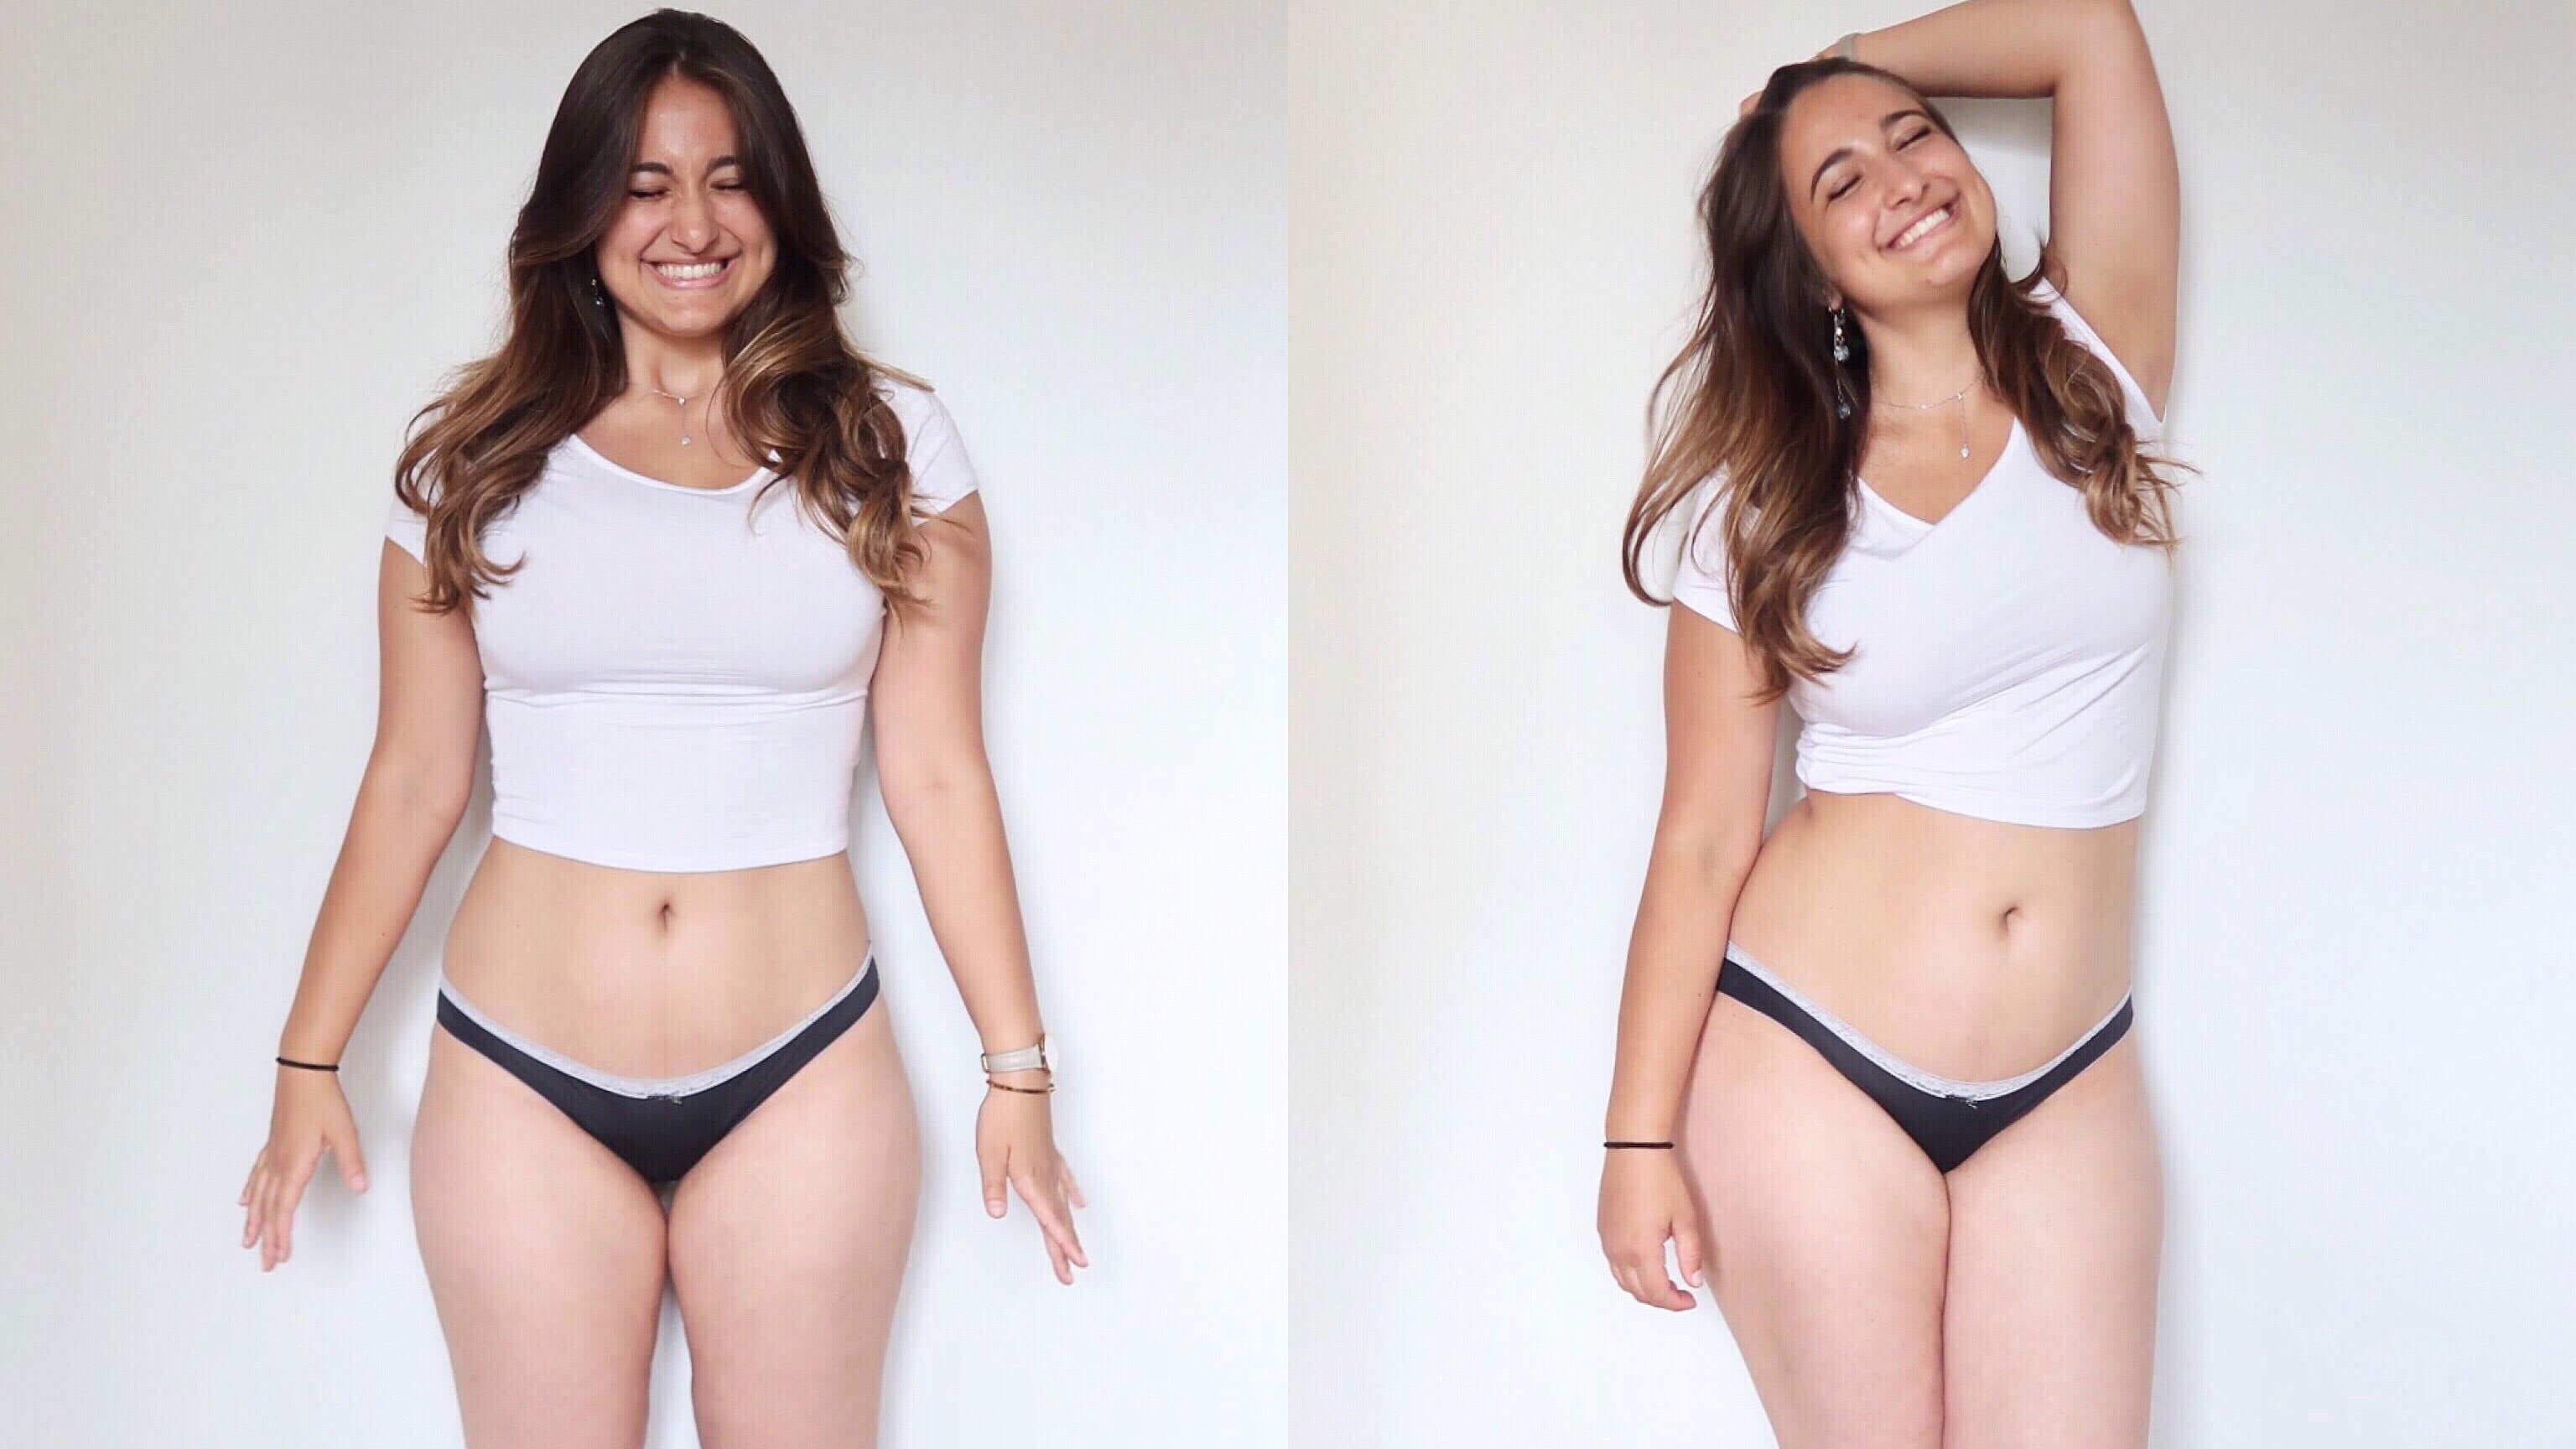 clare kenney recommends best thigh gaps ever pic